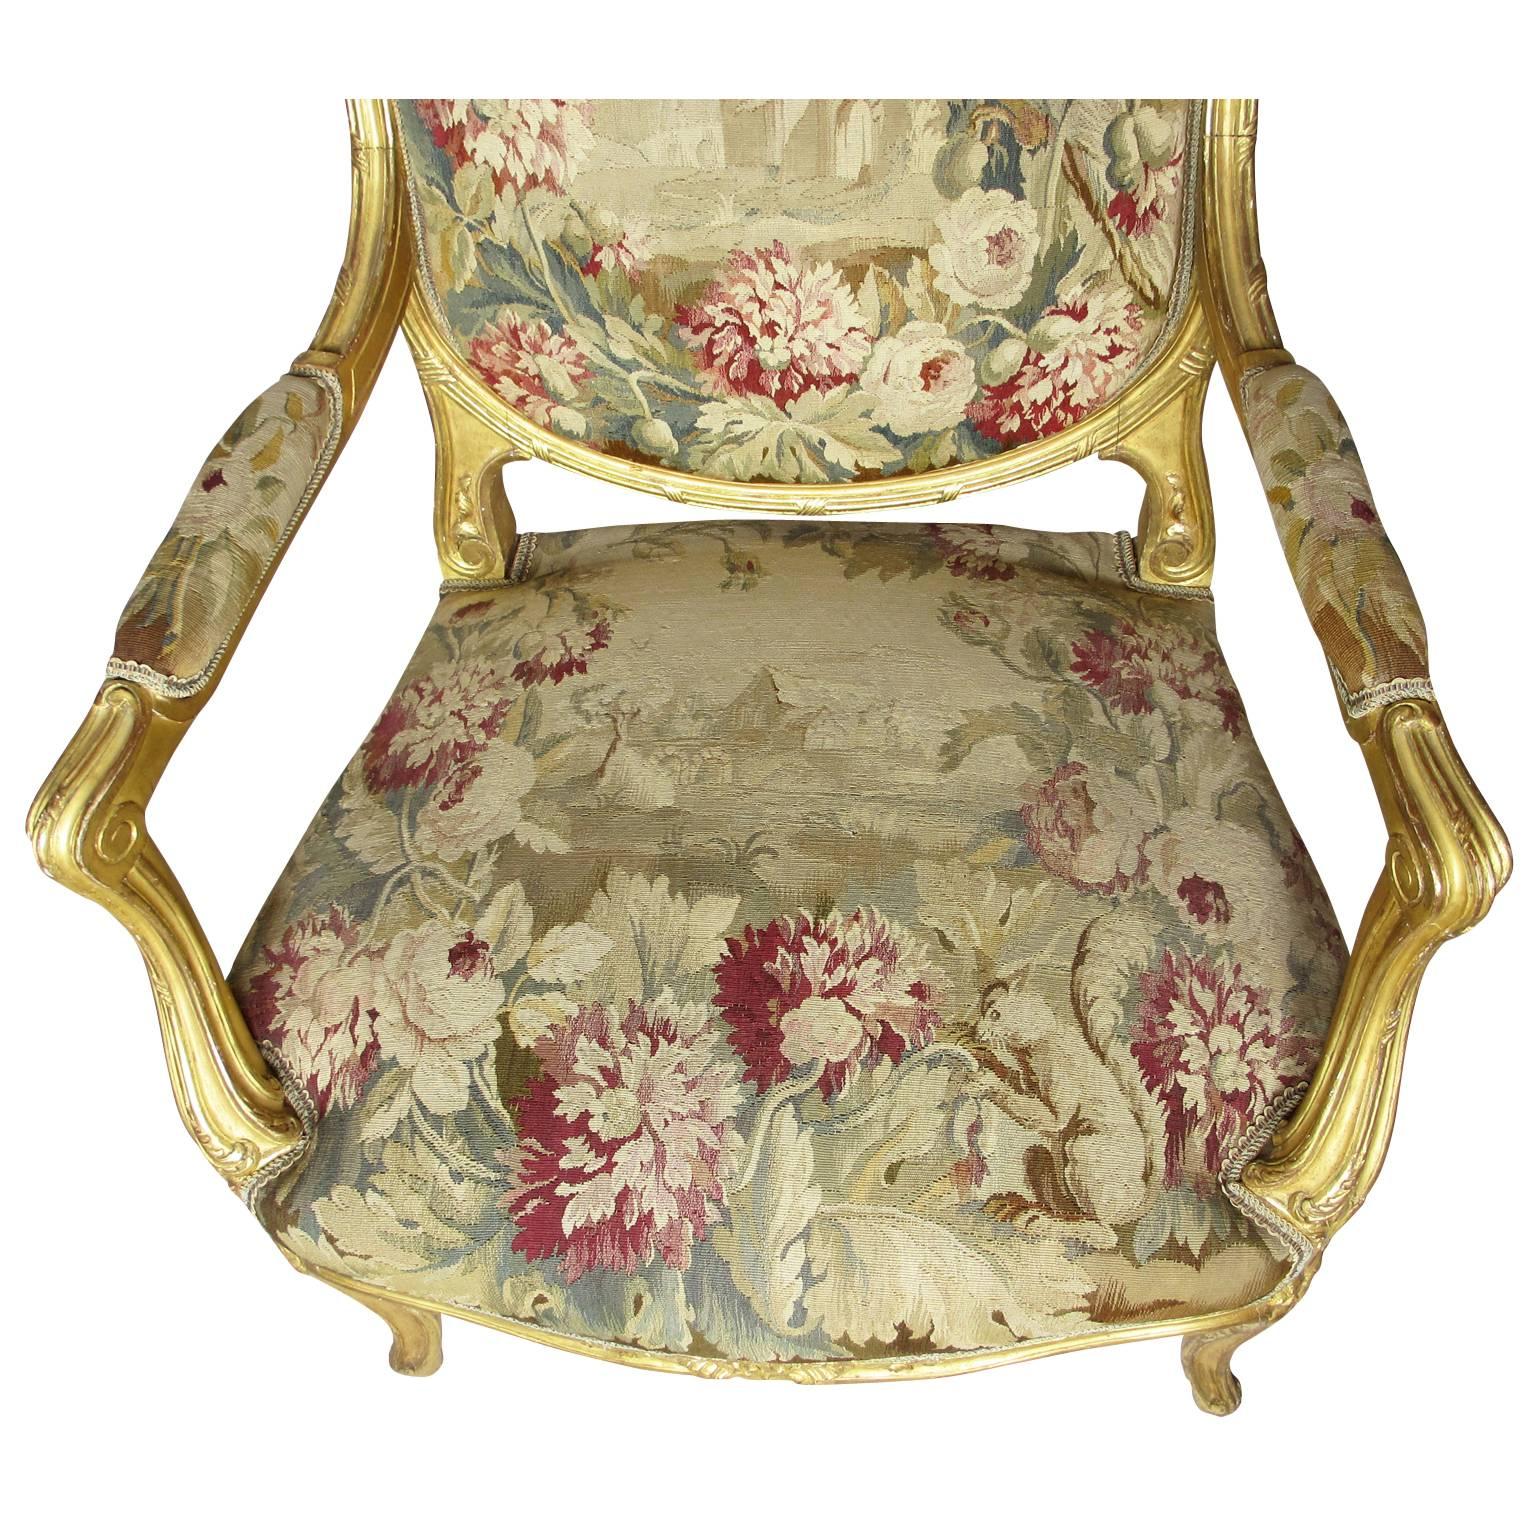 French 19th Century Louis XV Style Three-Piece Giltwood and Aubusson Salon Suite For Sale 2